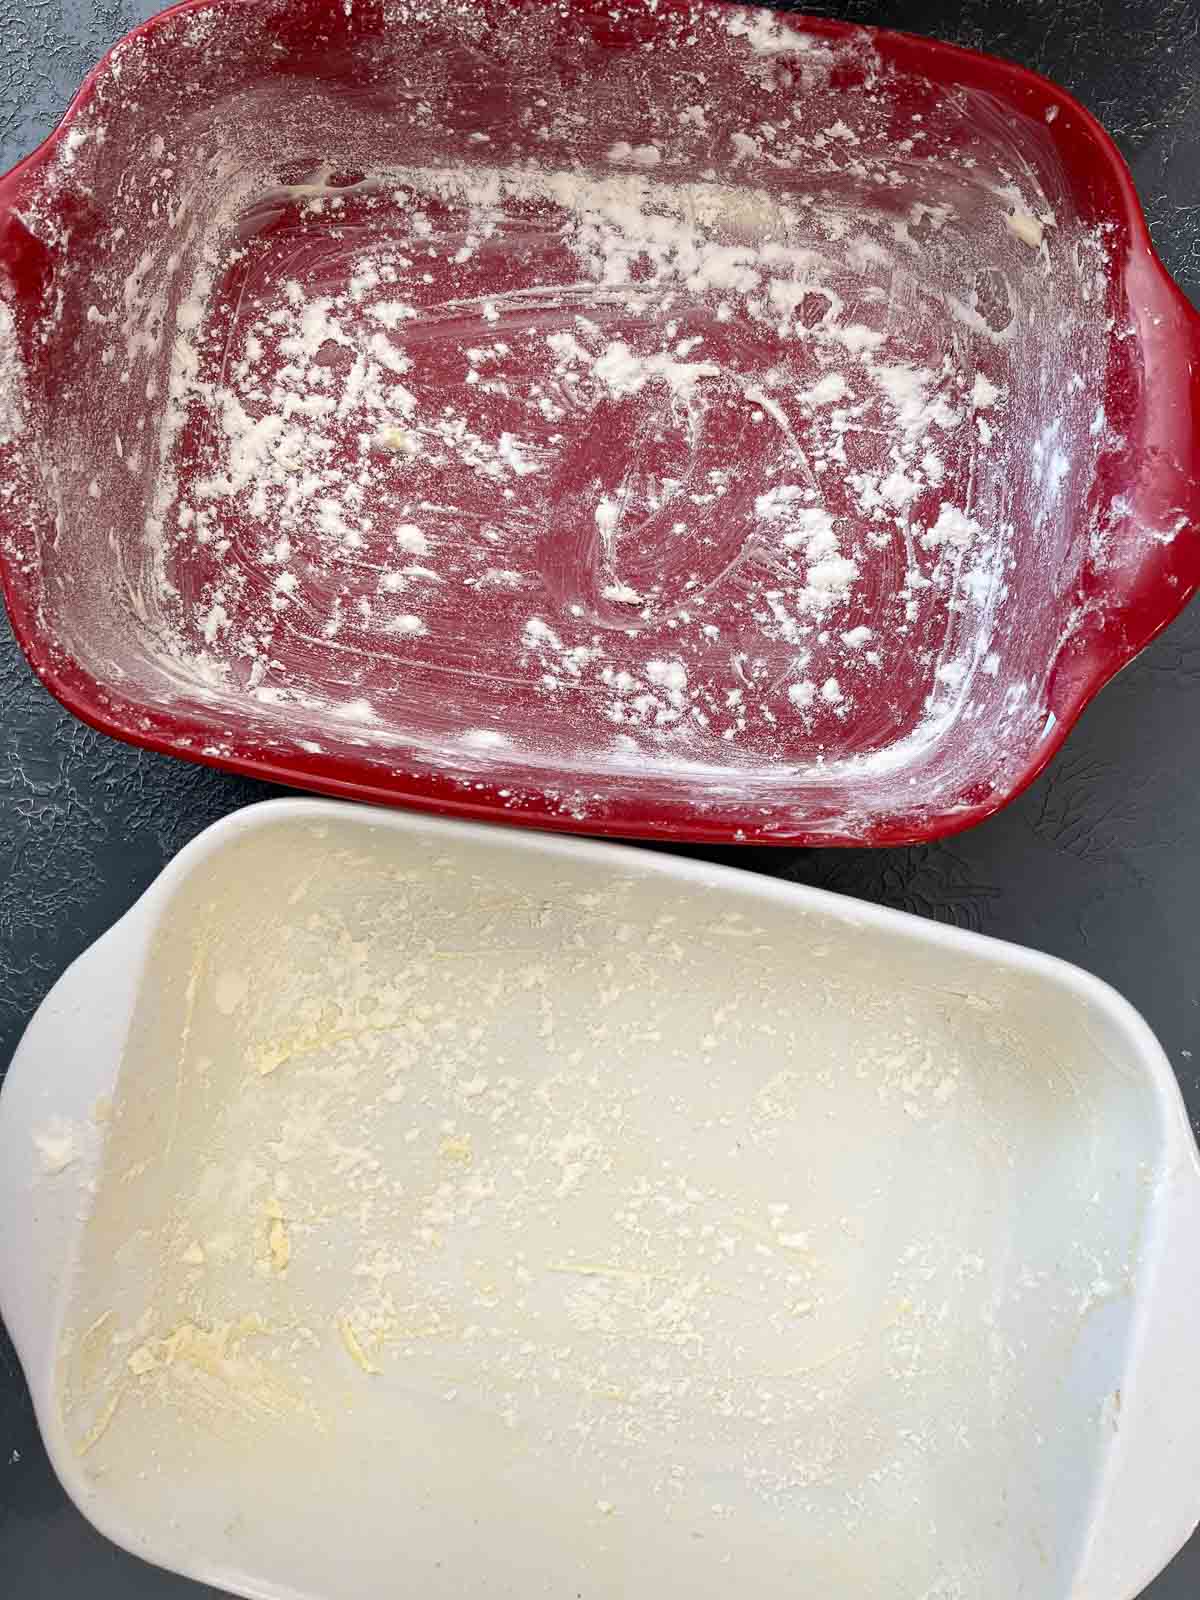 Buttered and floured baking pans